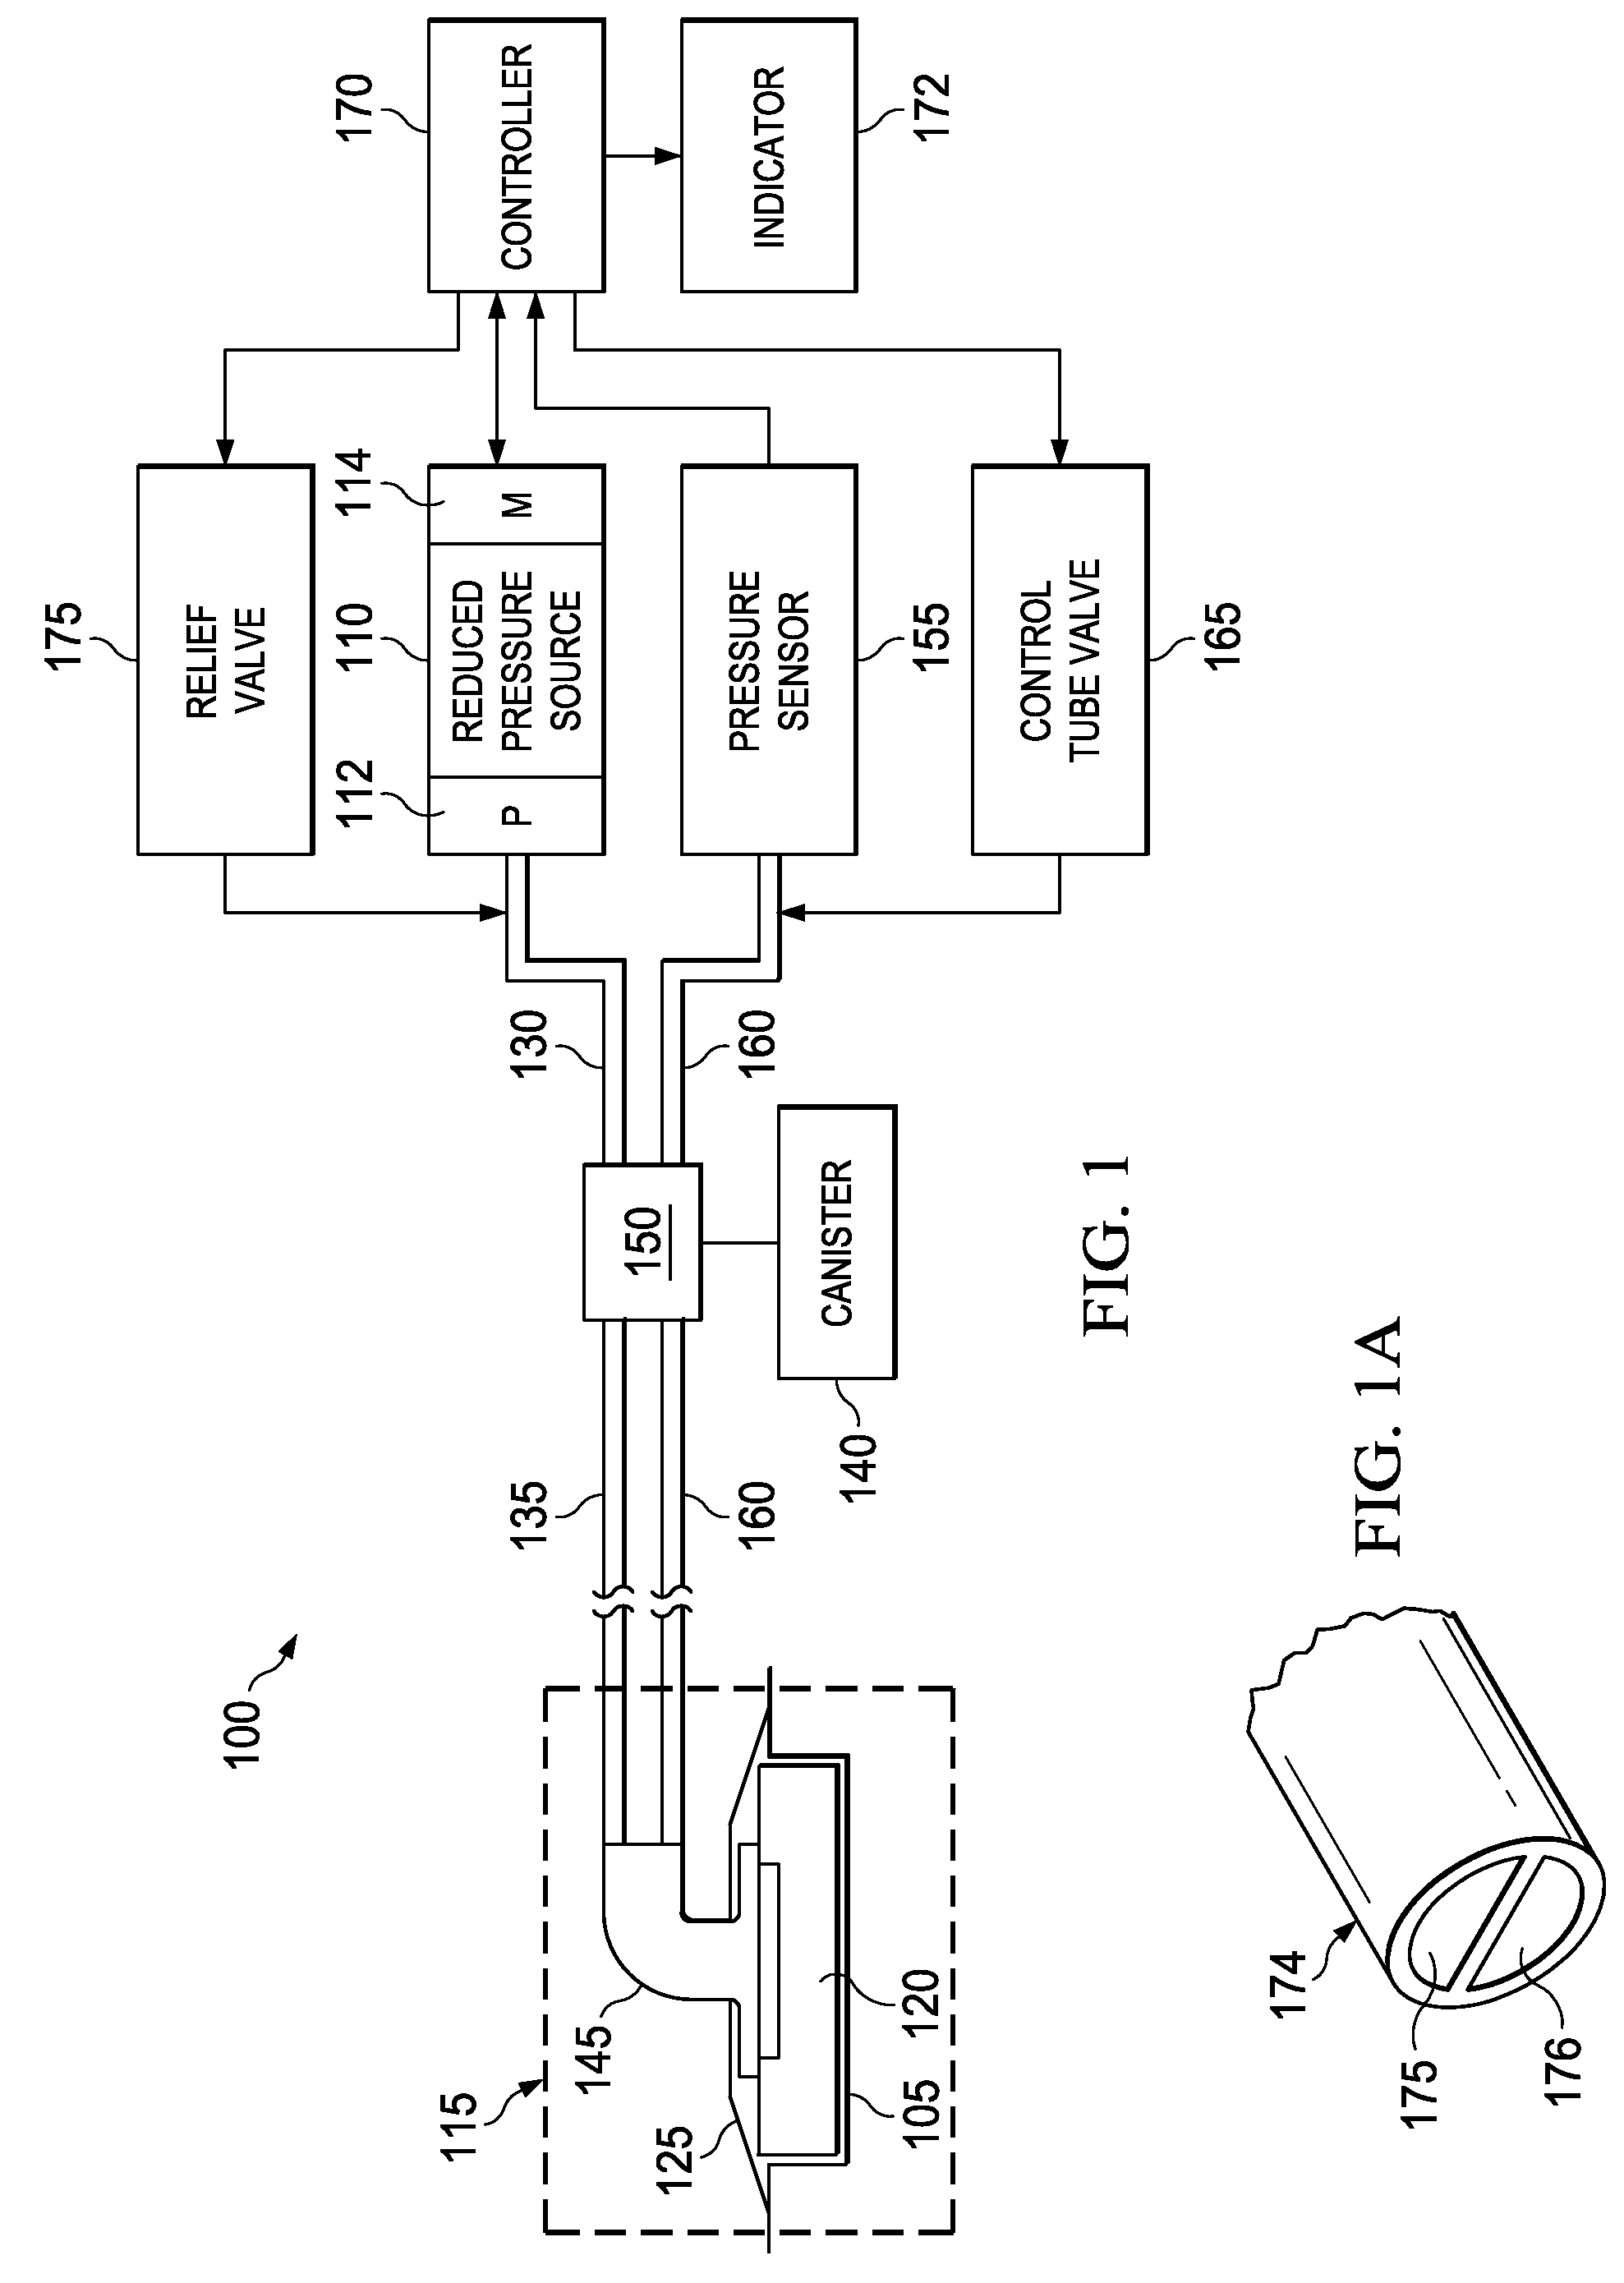 System and method for managing reduced pressure delivered to a tissue site